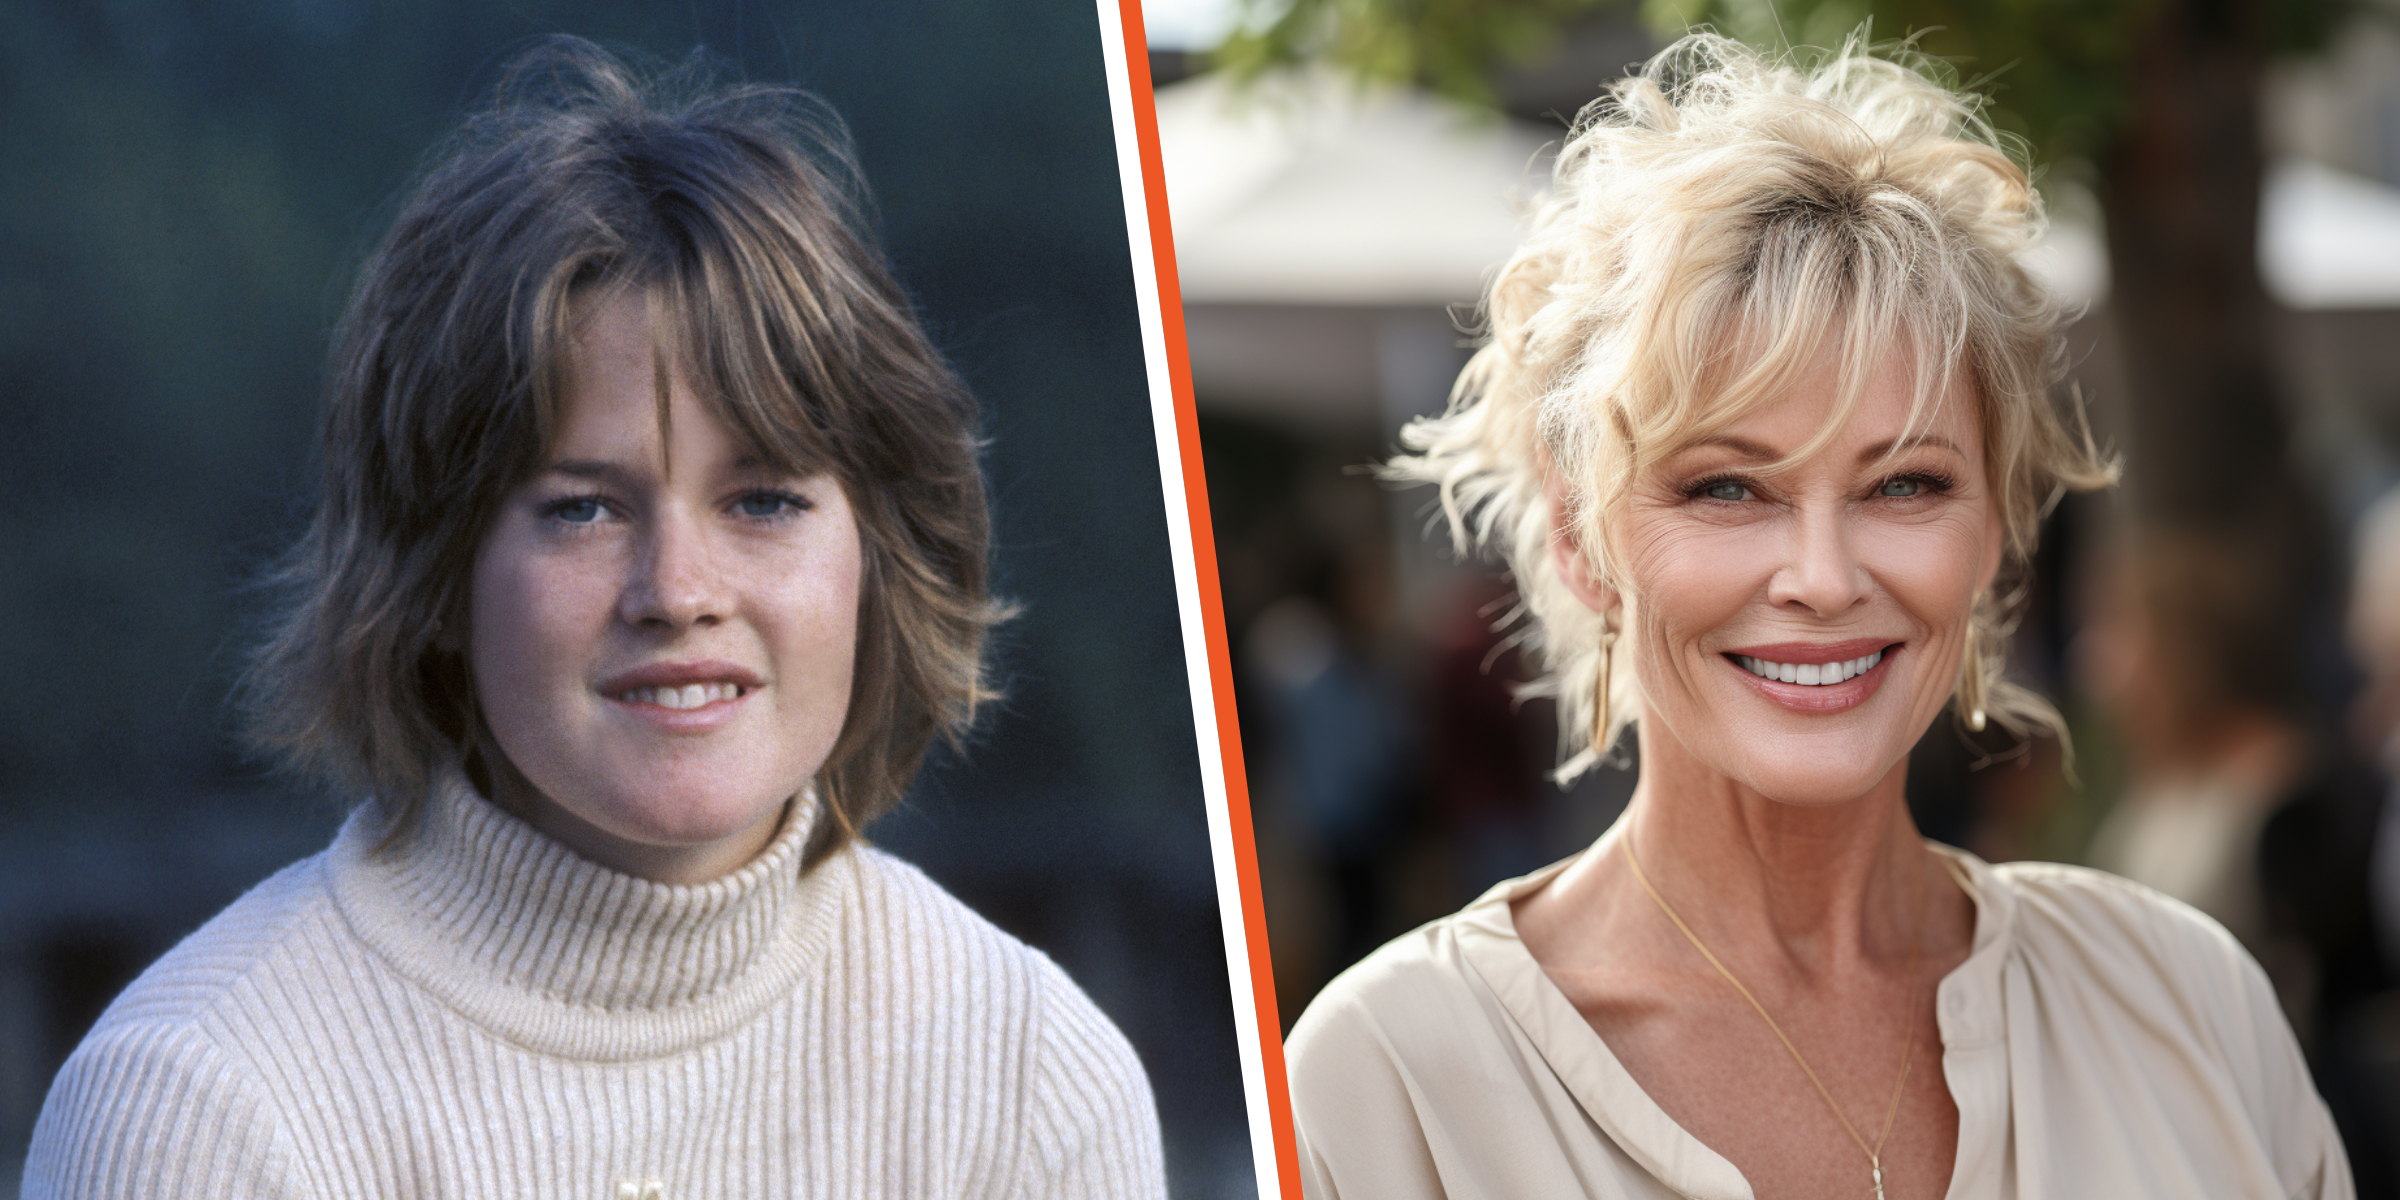 Melanie Griffith | Sources: Getty Images | Midjourney